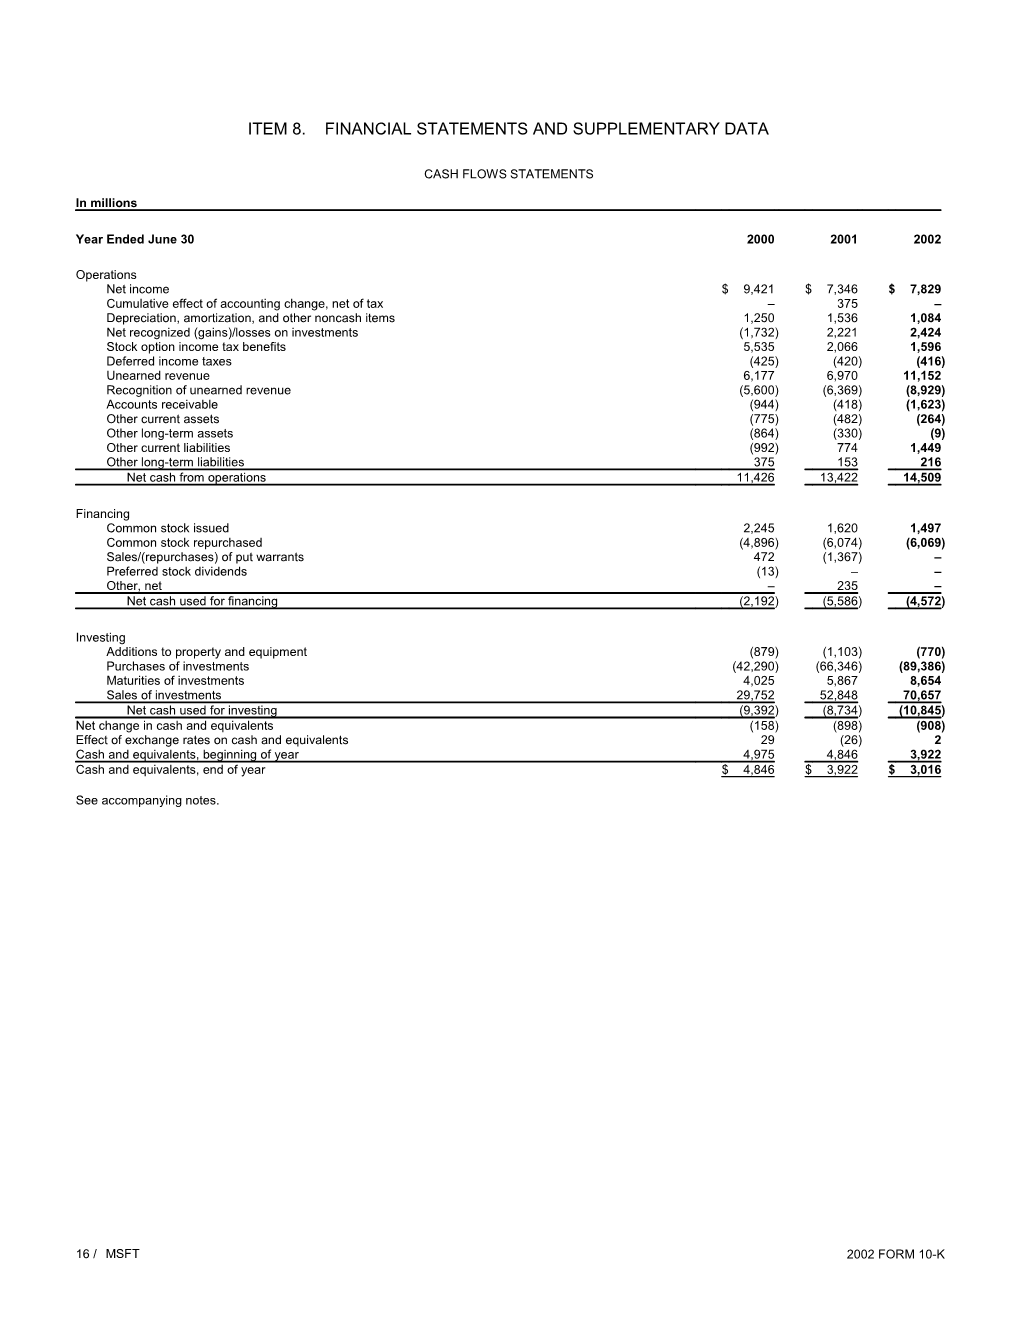 Item 8.Financial Statements and Supplementary Data